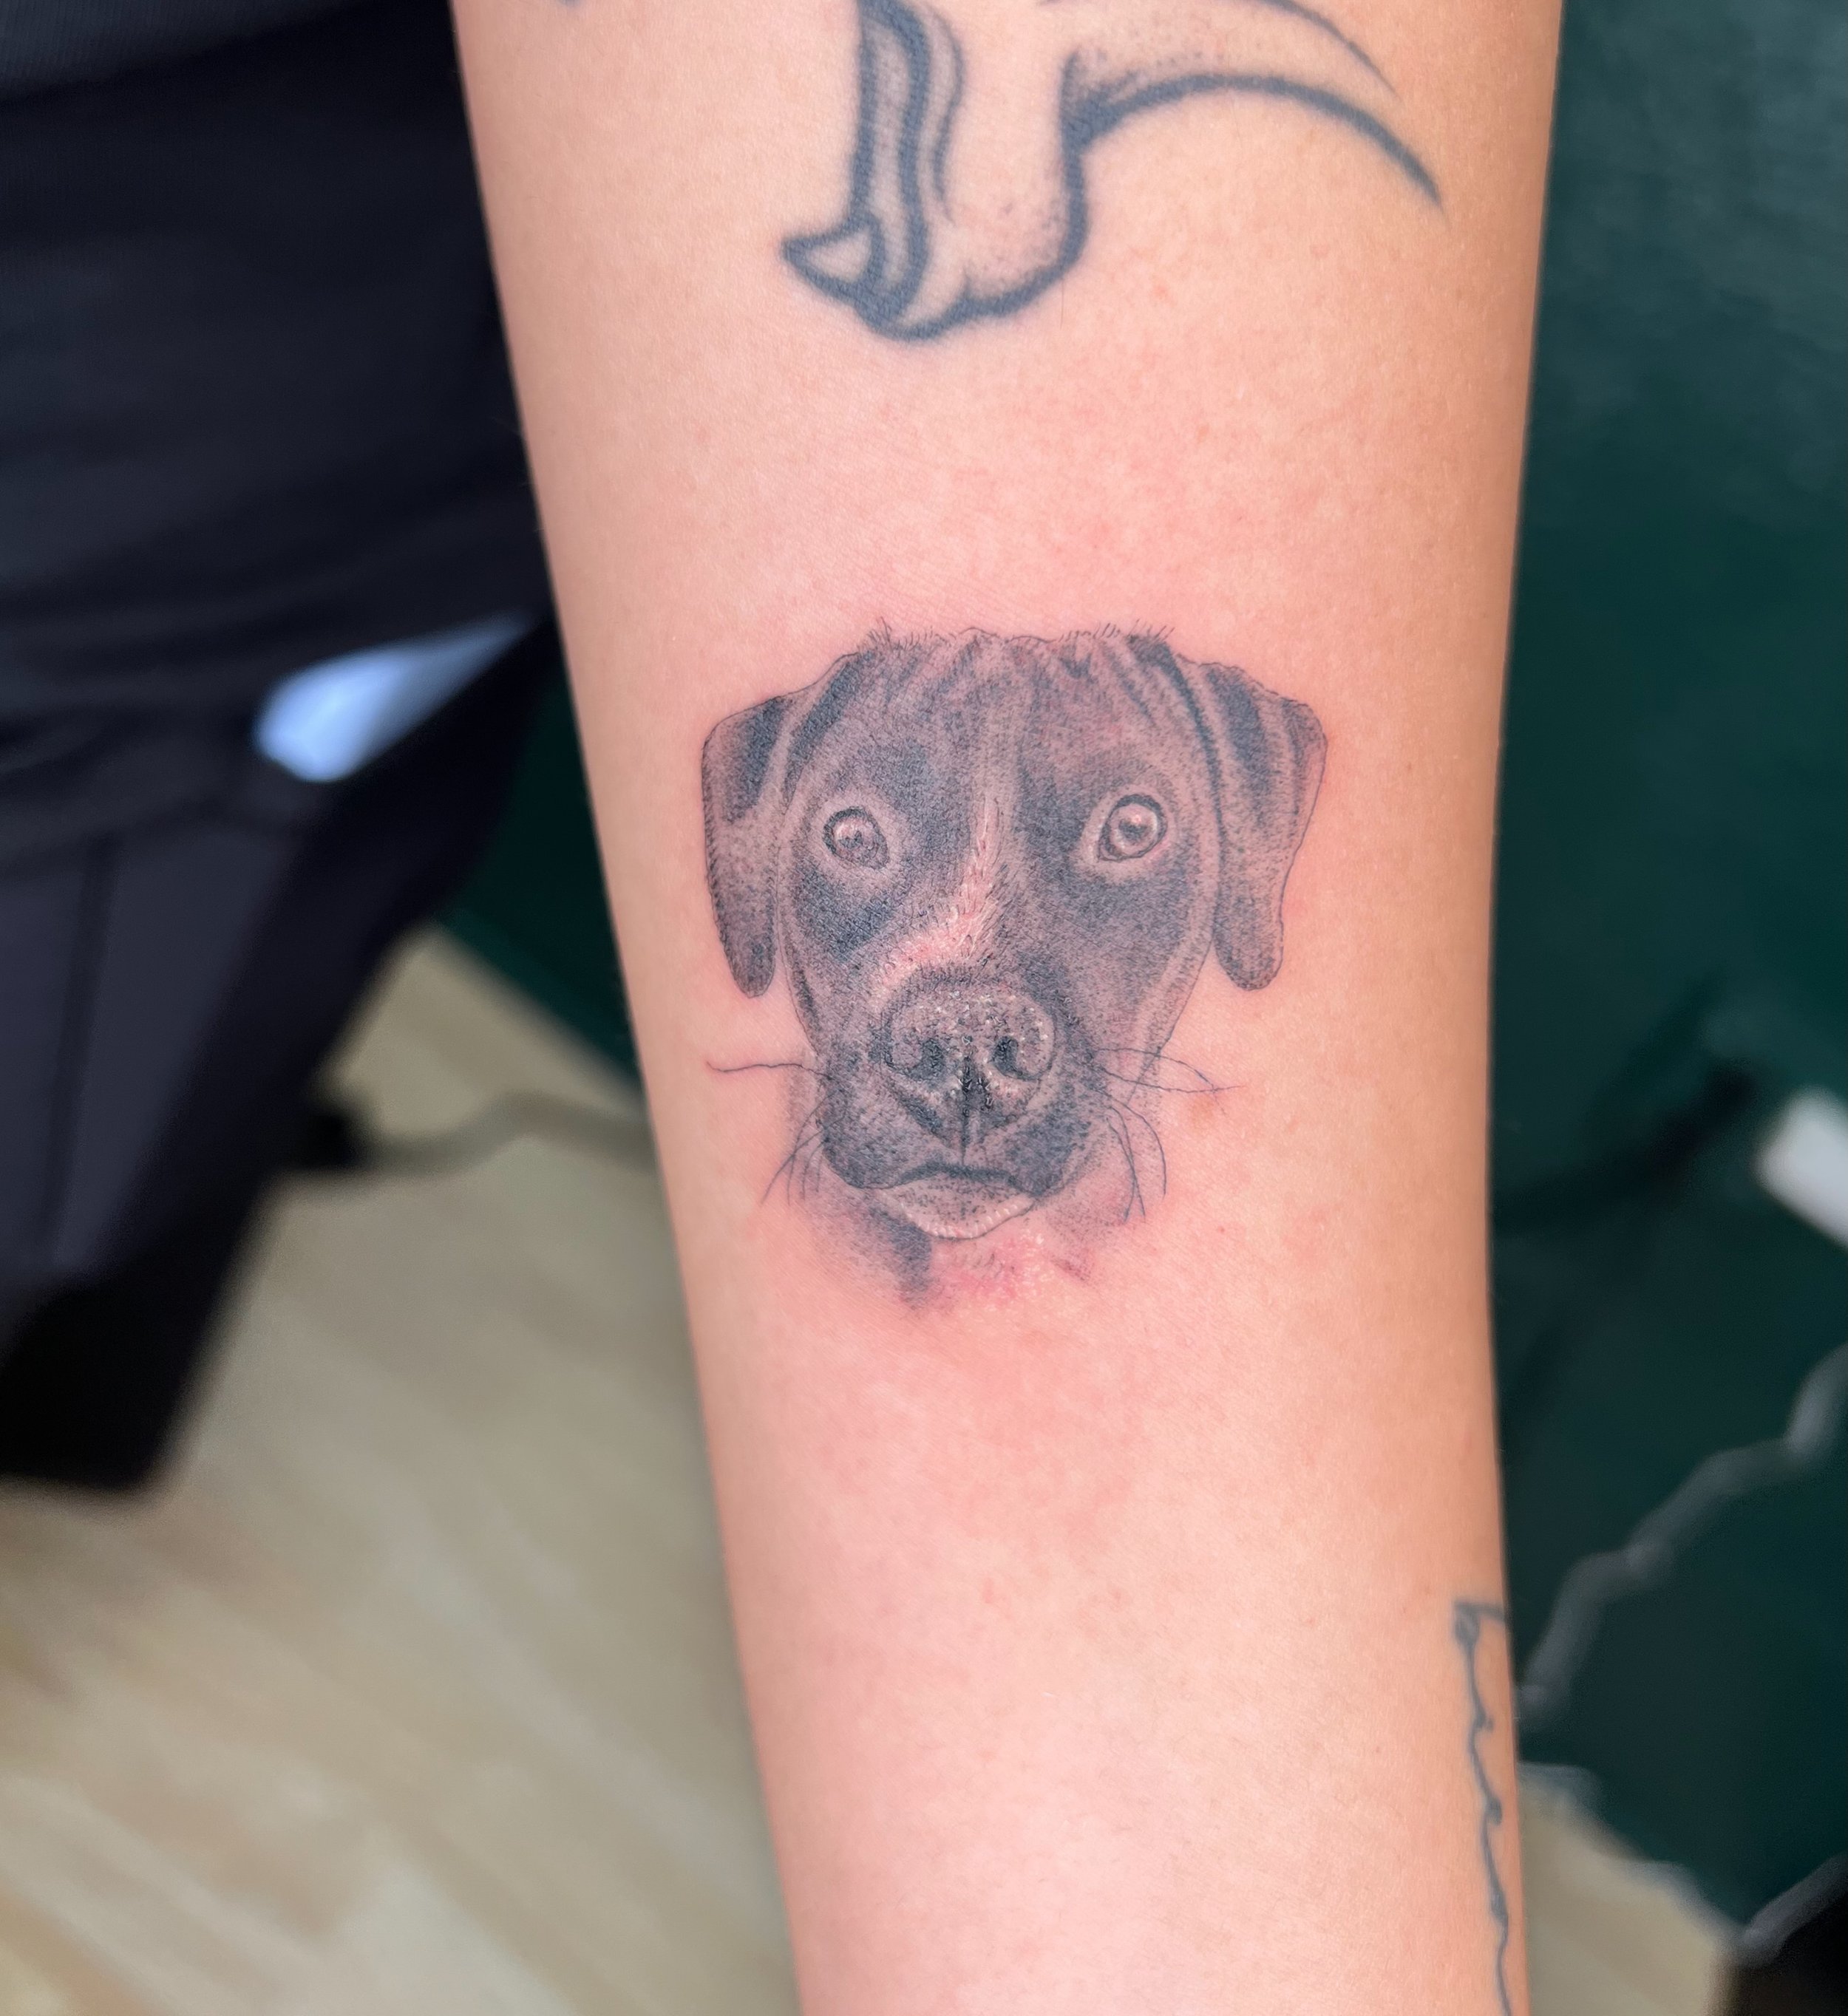 100 Heartwarming Dog Memorial Tattoos and Ideas to Honor Your Dog - Tattoo  Me Now | Dog portrait tattoo, Dog memorial tattoos, Dog tattoos